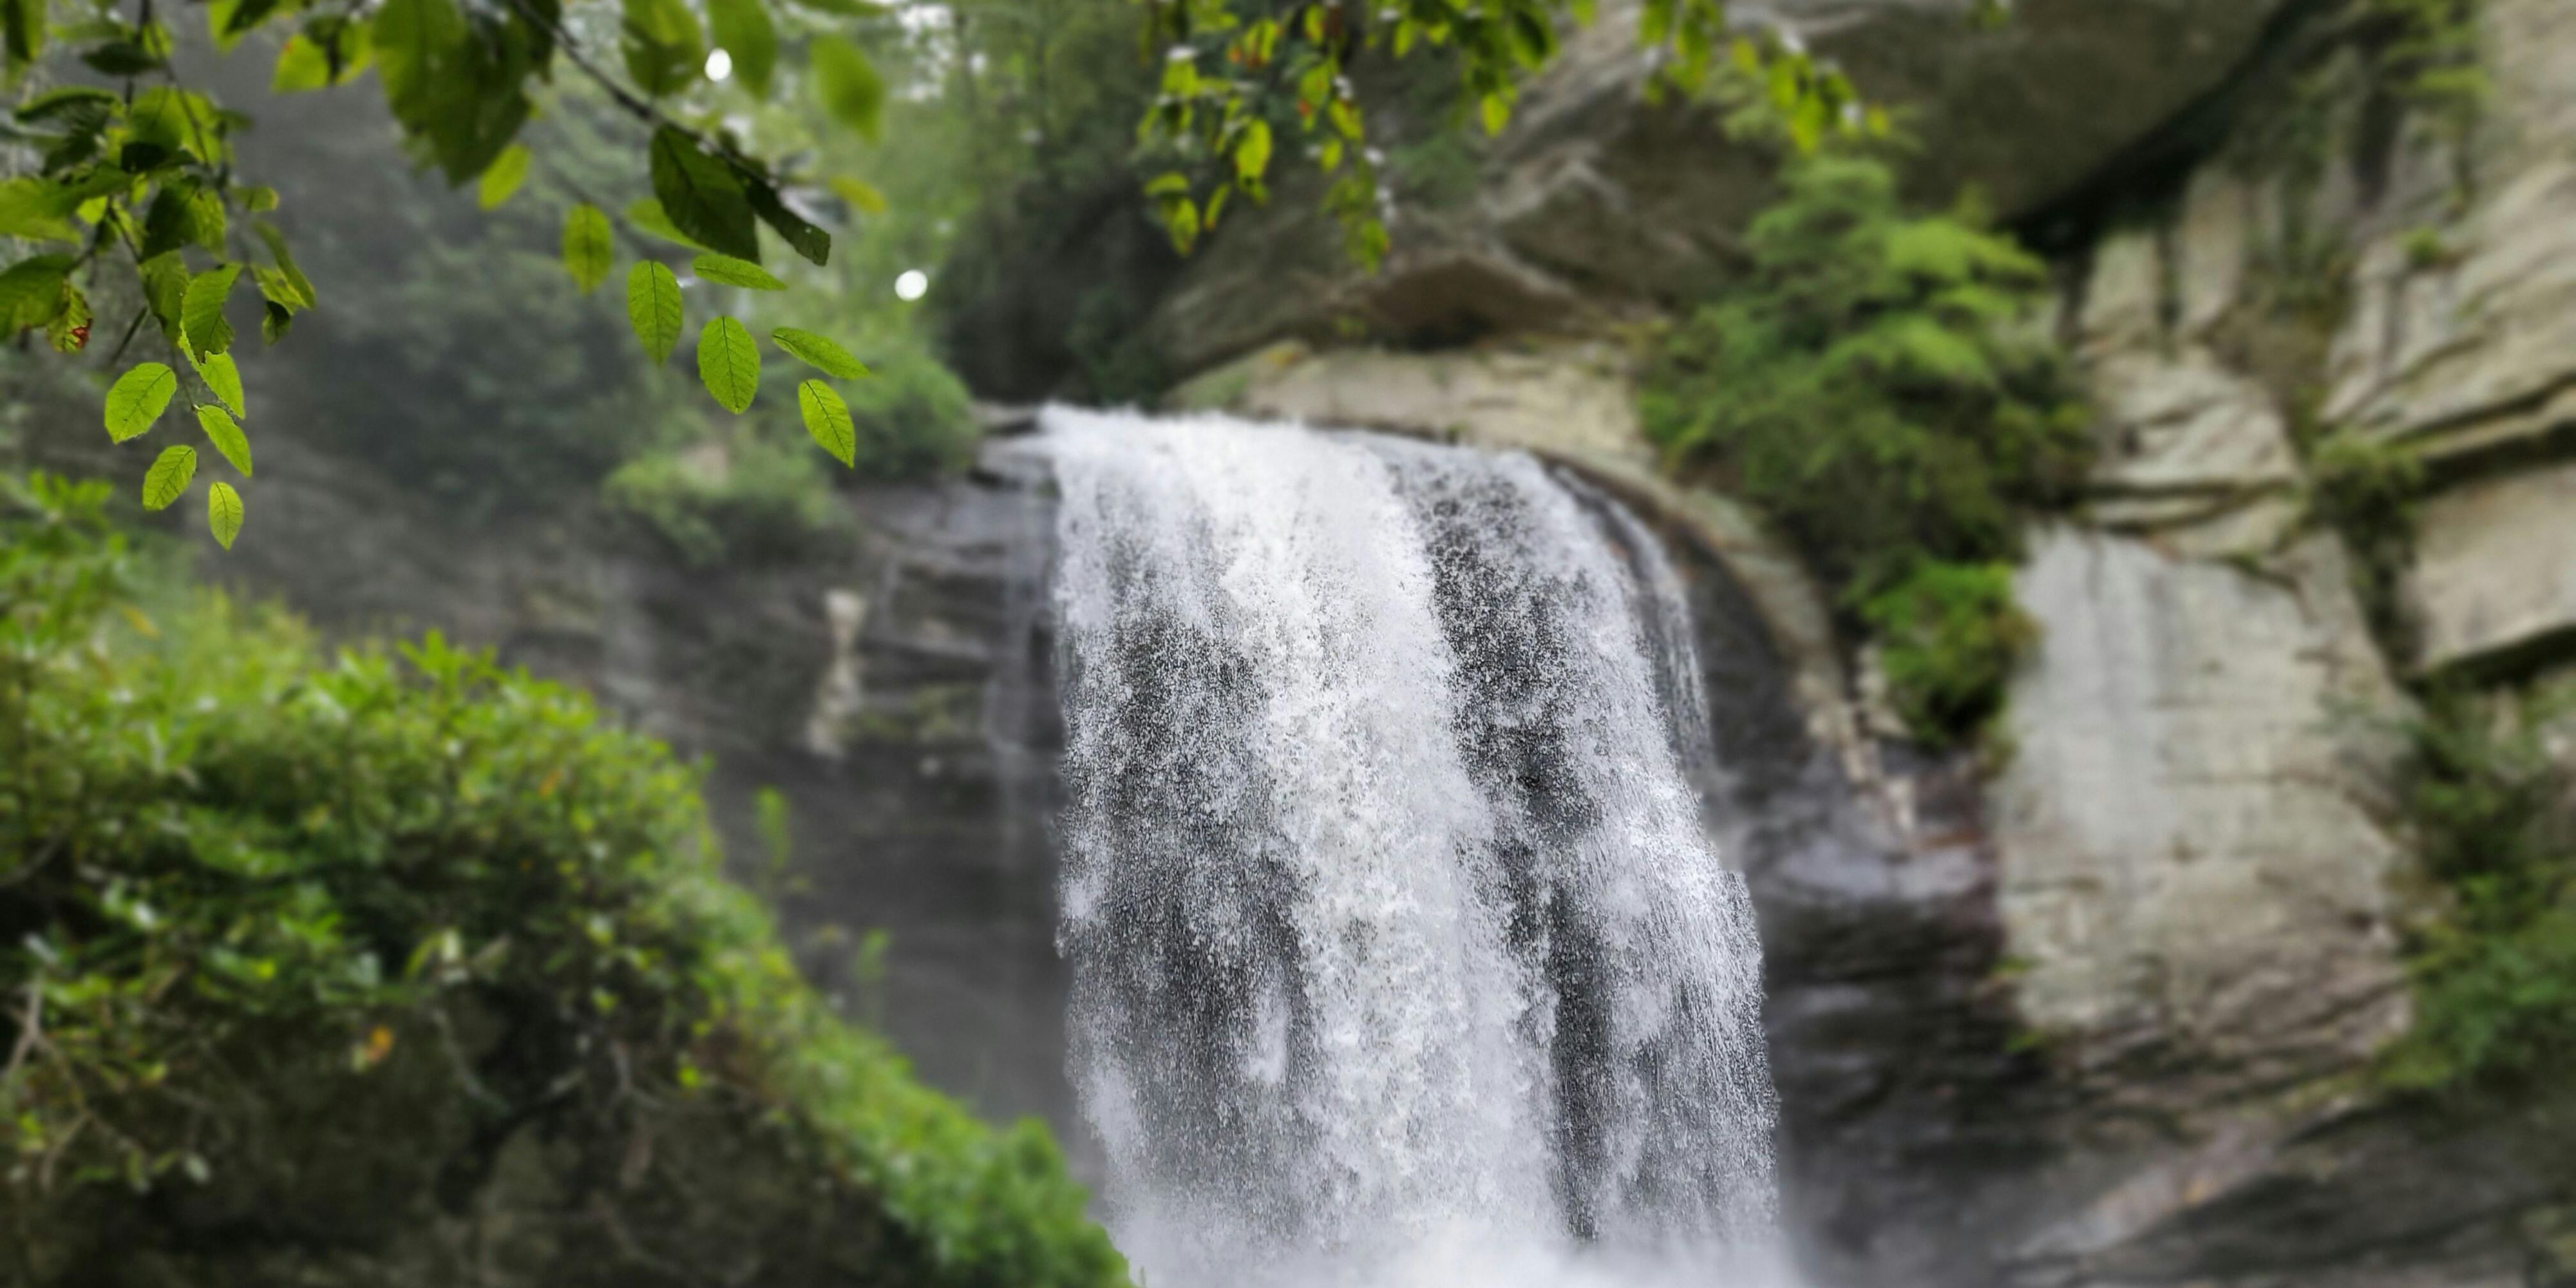 We are only a short drive from the beautiful Pisgah National Forest as well as Dupont State Forest where hundreds of waterfalls and trails await your story of adventure!